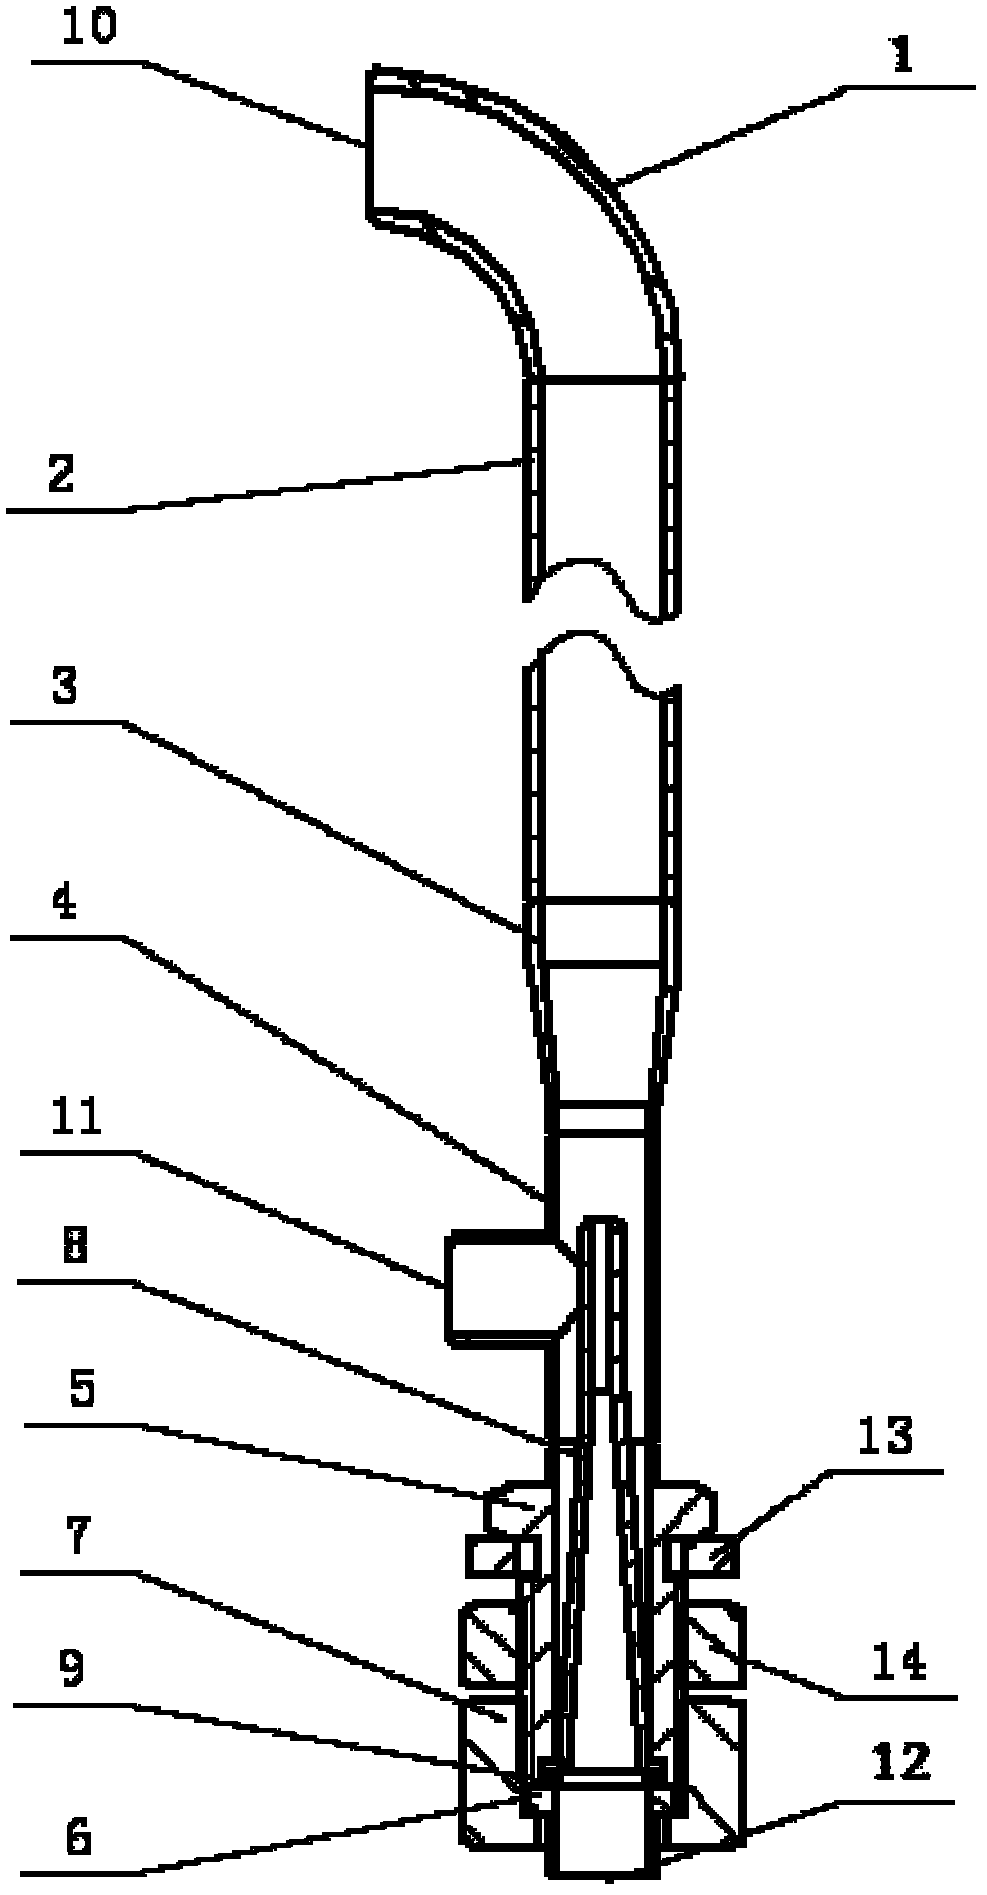 Circulating accelerating pipe used in annular fluidized bed reactor